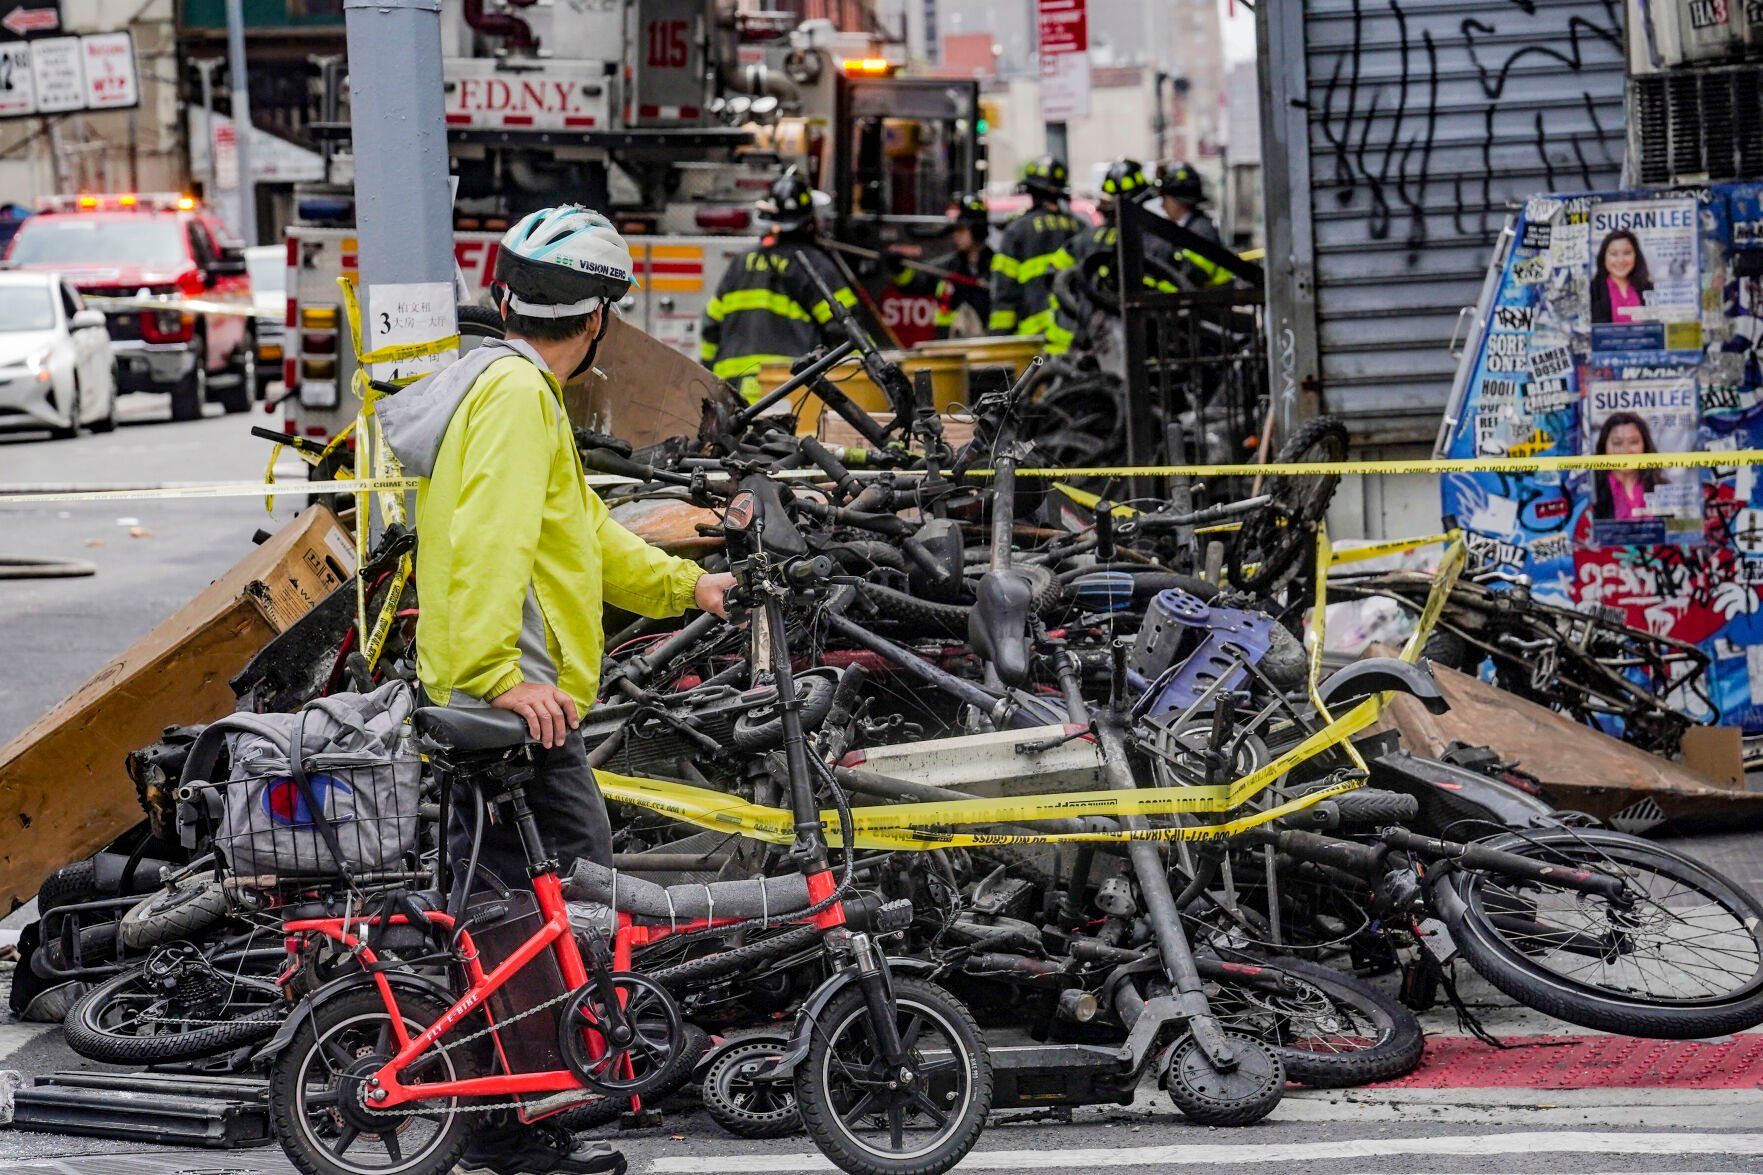 <p>FILE - A biker stops to look at a pile of e-bikes in the aftermath of a fire in Chinatown, which authorities say started at an e-bike shop and spread to upper-floor apartments, Tuesday June 20, 2023, in New York. Federal officials are looking into cracking down on defective lithium-ion batteries that power hoverboards, scooters and motorized bicycles because of a rash of deadly fires caused by exploding batteries. The effort comes as New York City implements new laws meant to reduce the number of fires, injuries and deaths in a city where e-bikes have become ubiquitous. (AP Photo/Bebeto Matthews, File)</p>   PHOTO CREDIT: Bebeto Matthews 